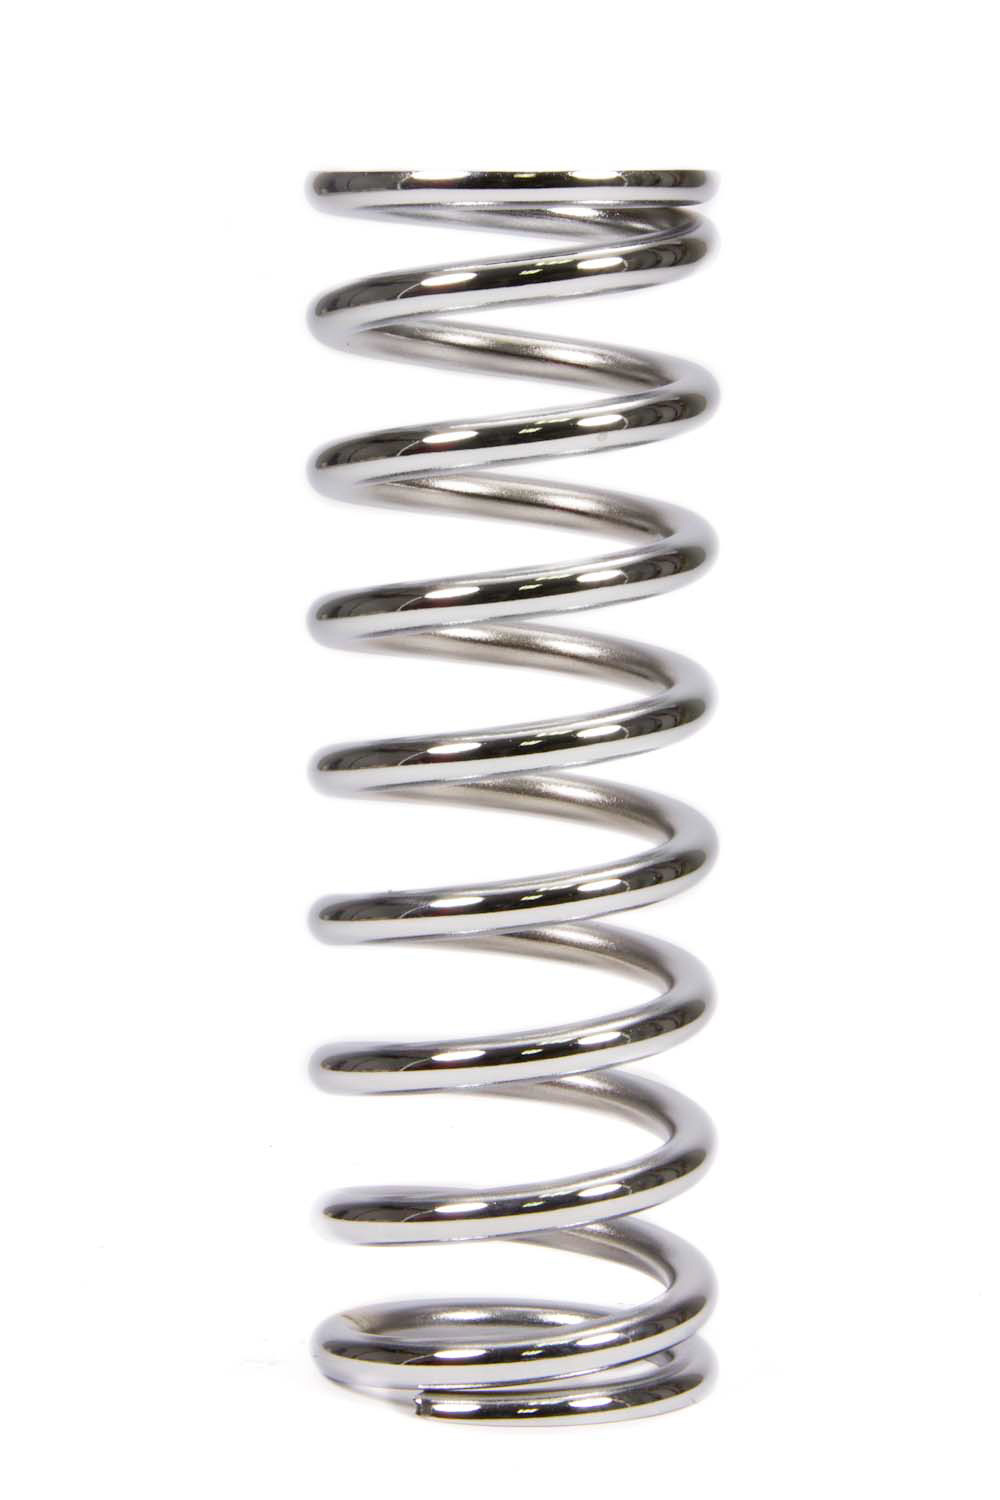 QA1 10CS350 Coil Spring, Coil-Over, 2.500 in ID, 10.000 in Length, 350 lb/in Spring Rate, Steel, Chrome, Each